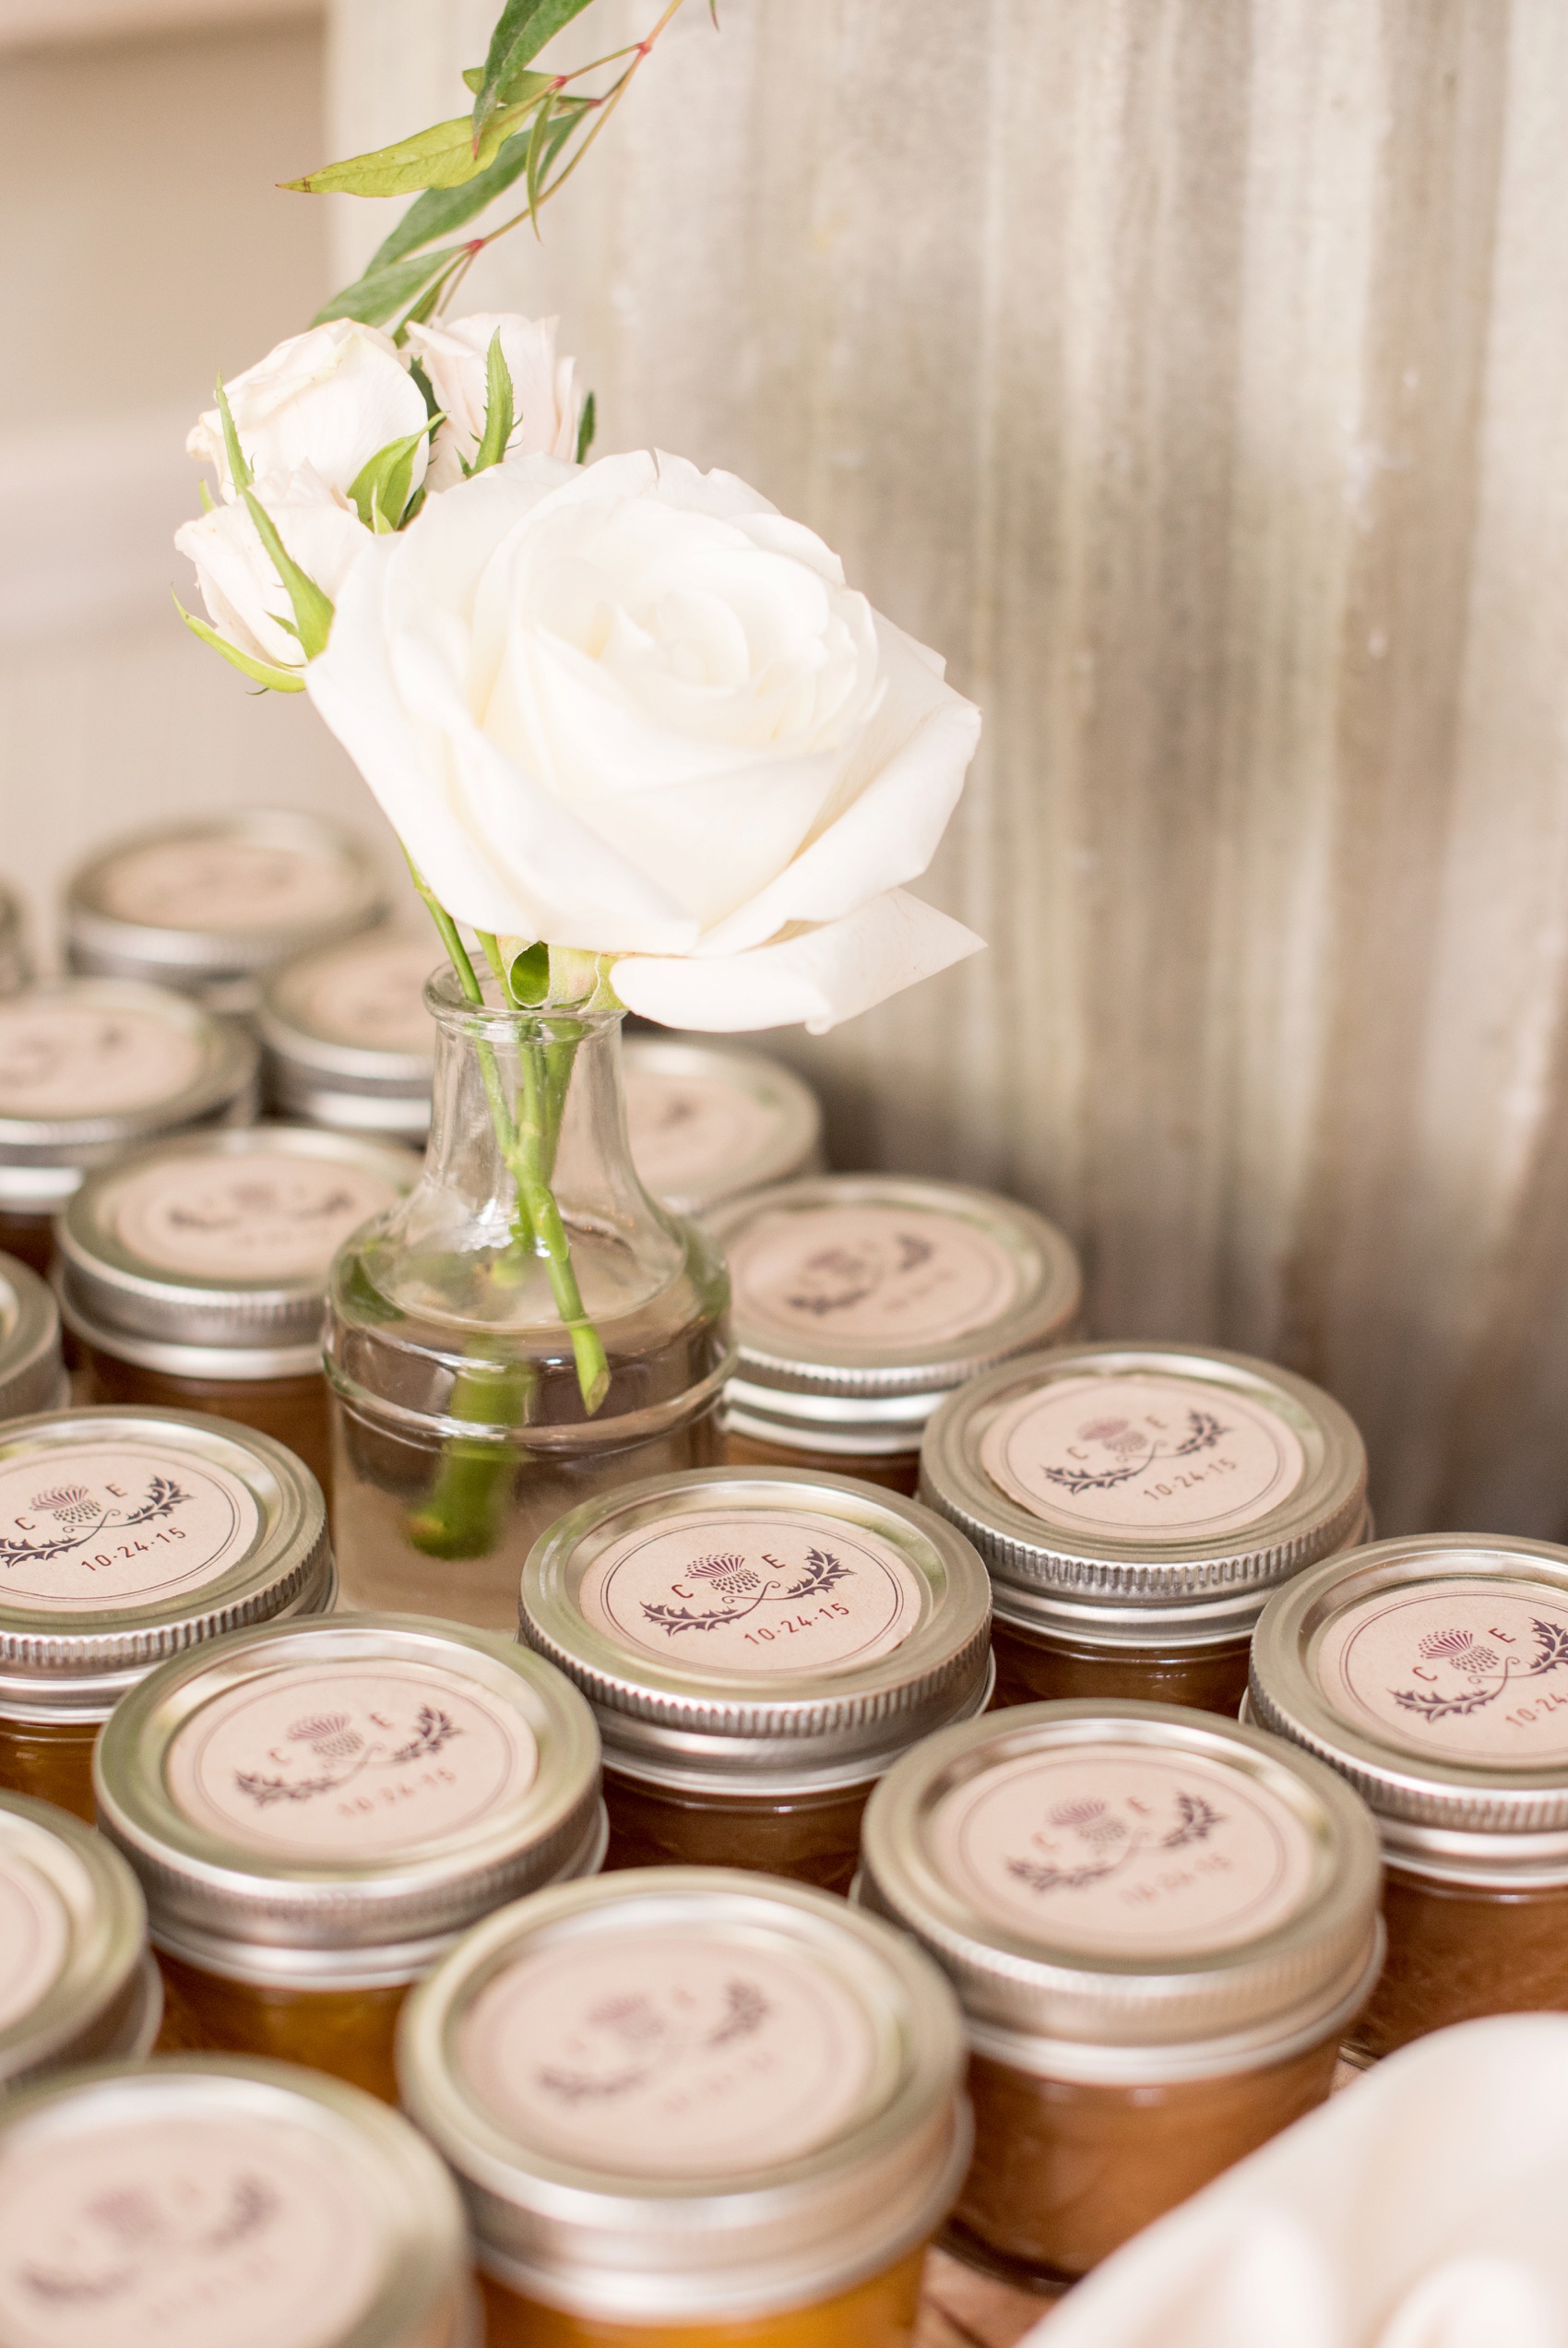 Crabtree Kittle's House wedding in NY. Images by Mikkel Paige Photography for a gay fall wedding. Coordination by Jove Meyer Events. Pumpkin butter mason jar favors.